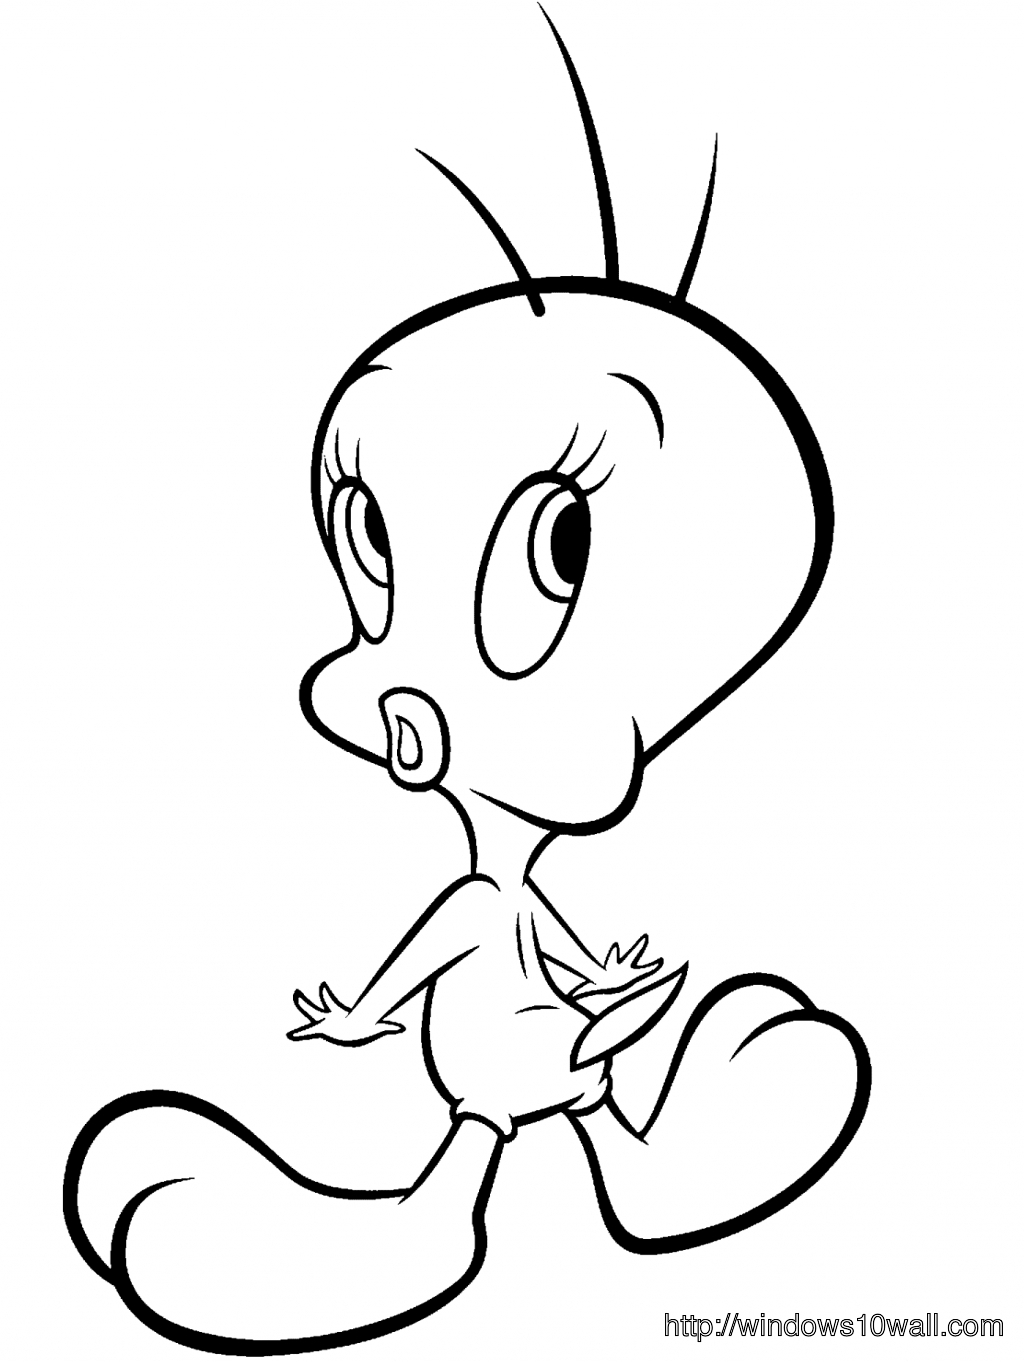 Tweety bird Coloring Page for Kids Wallpaper